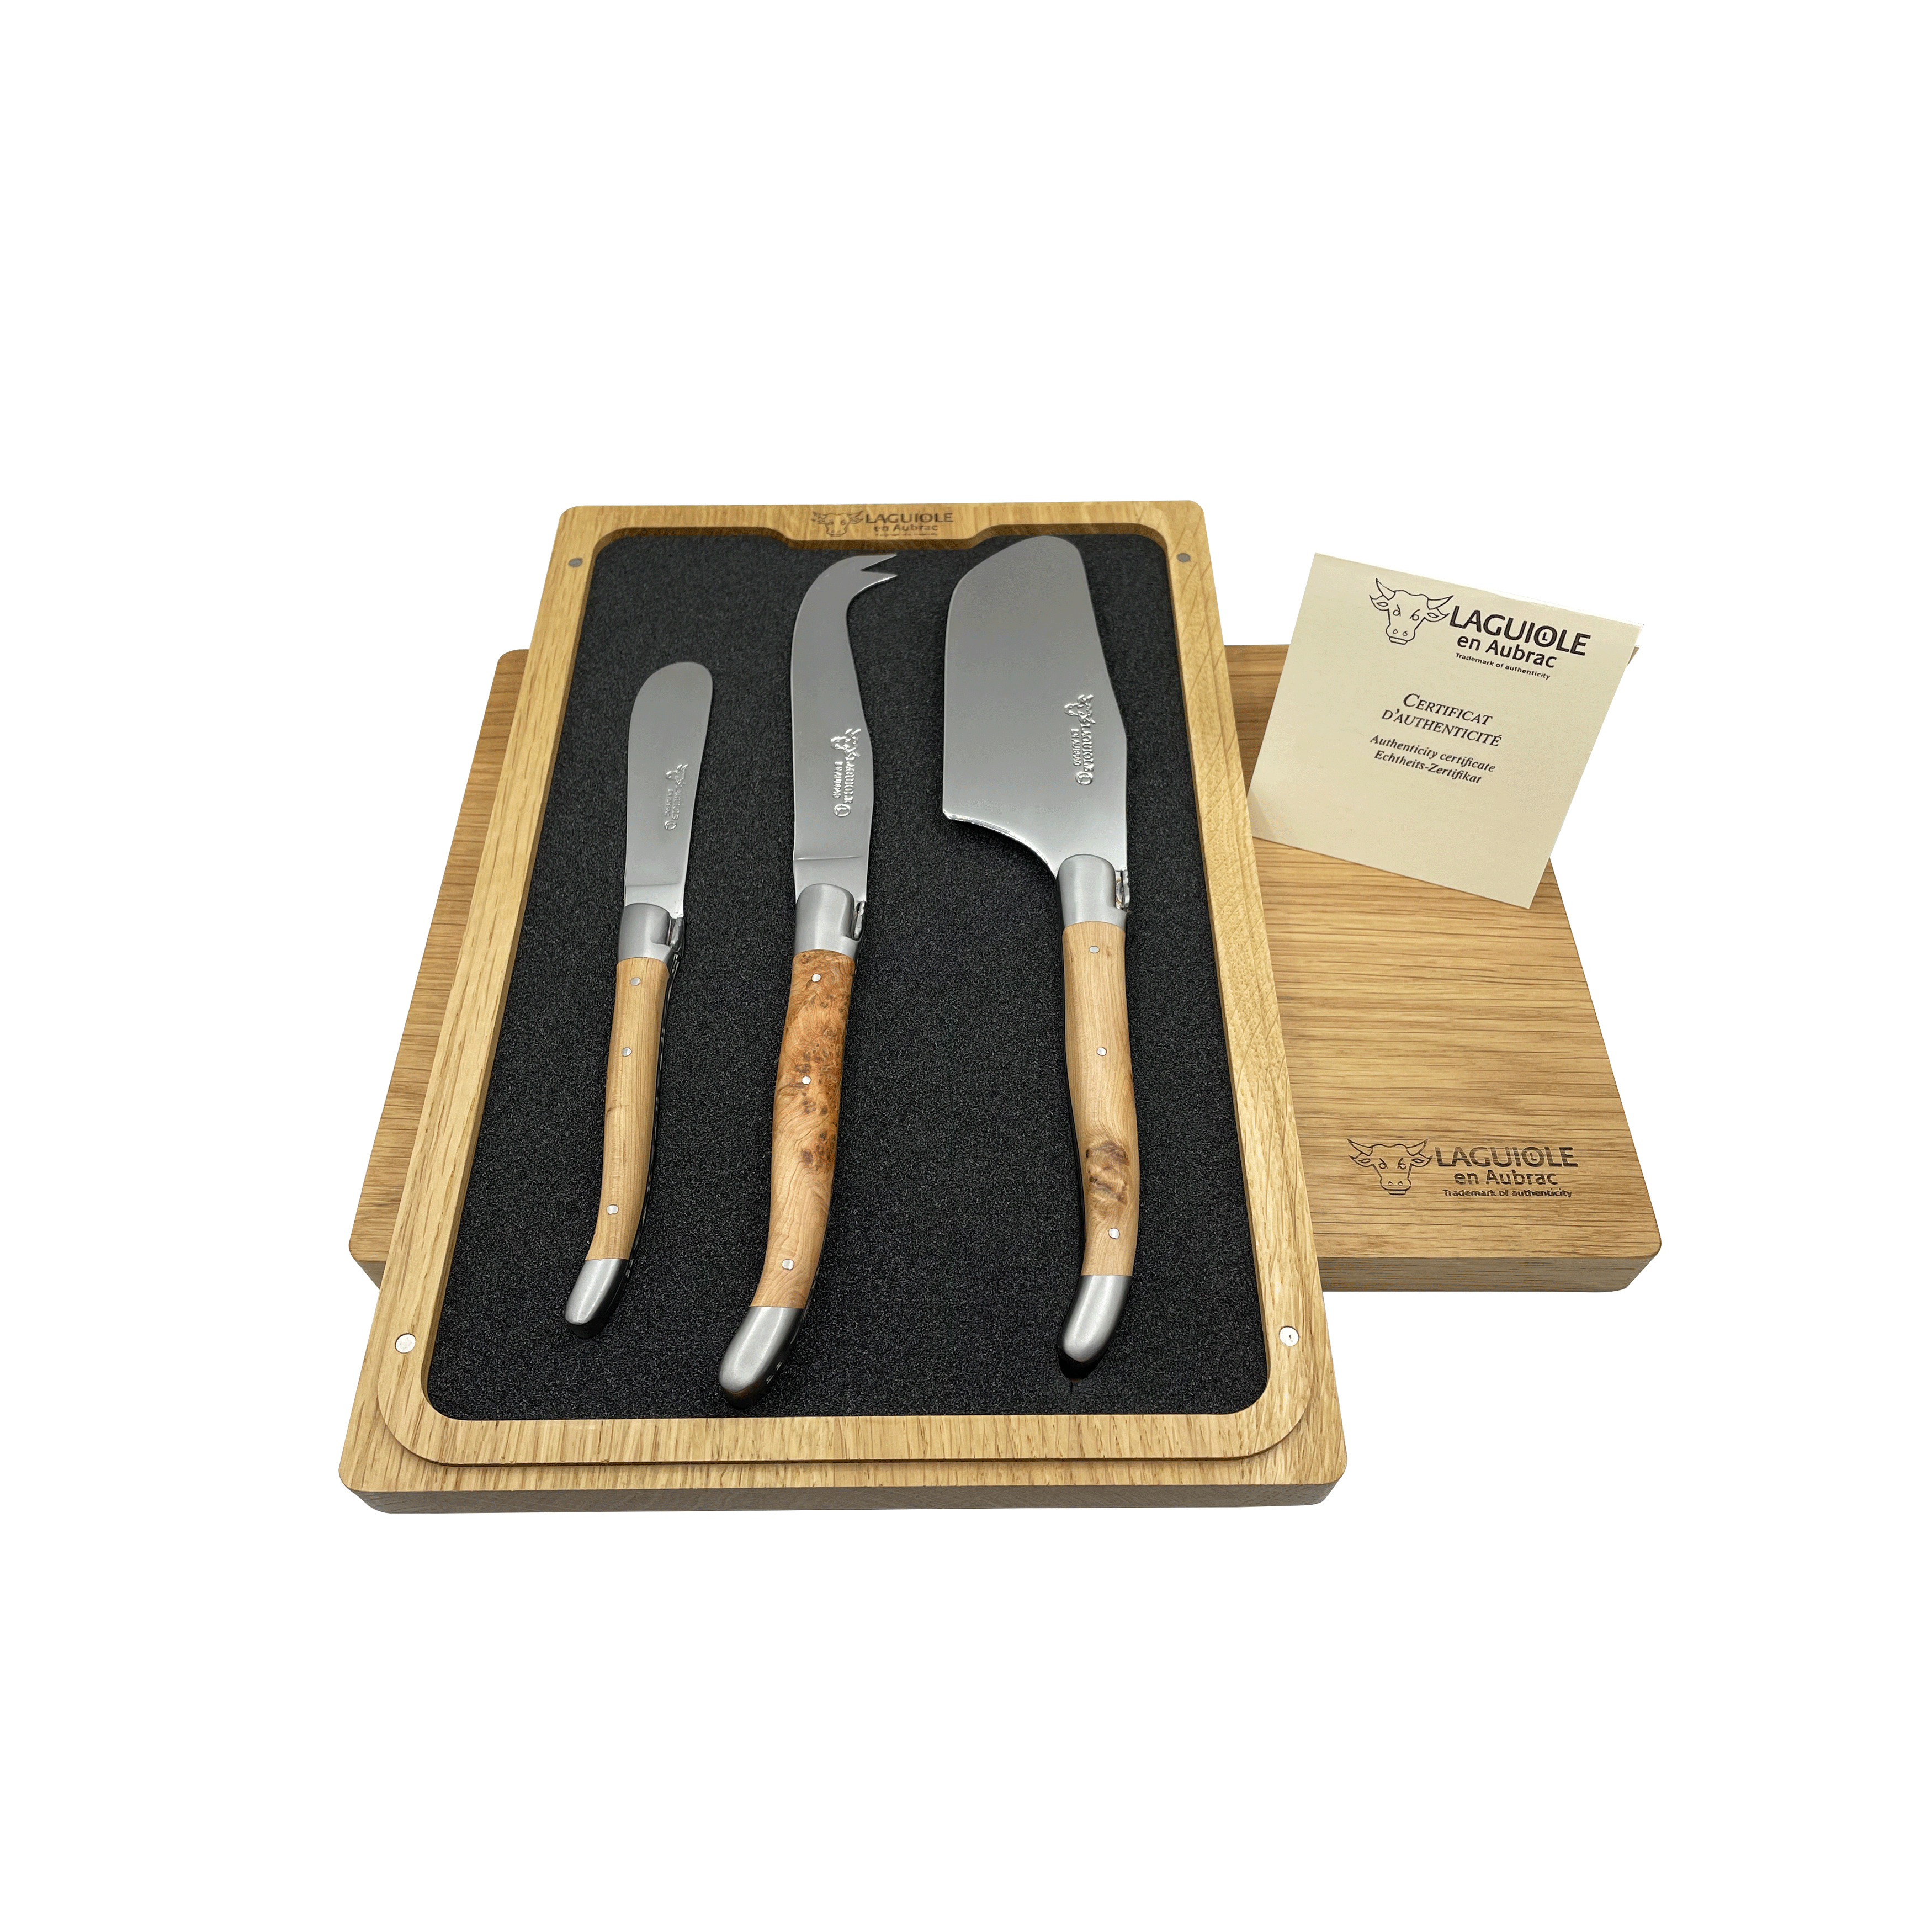 Black & Gold Cheese Knife Set of 3 – Be Home